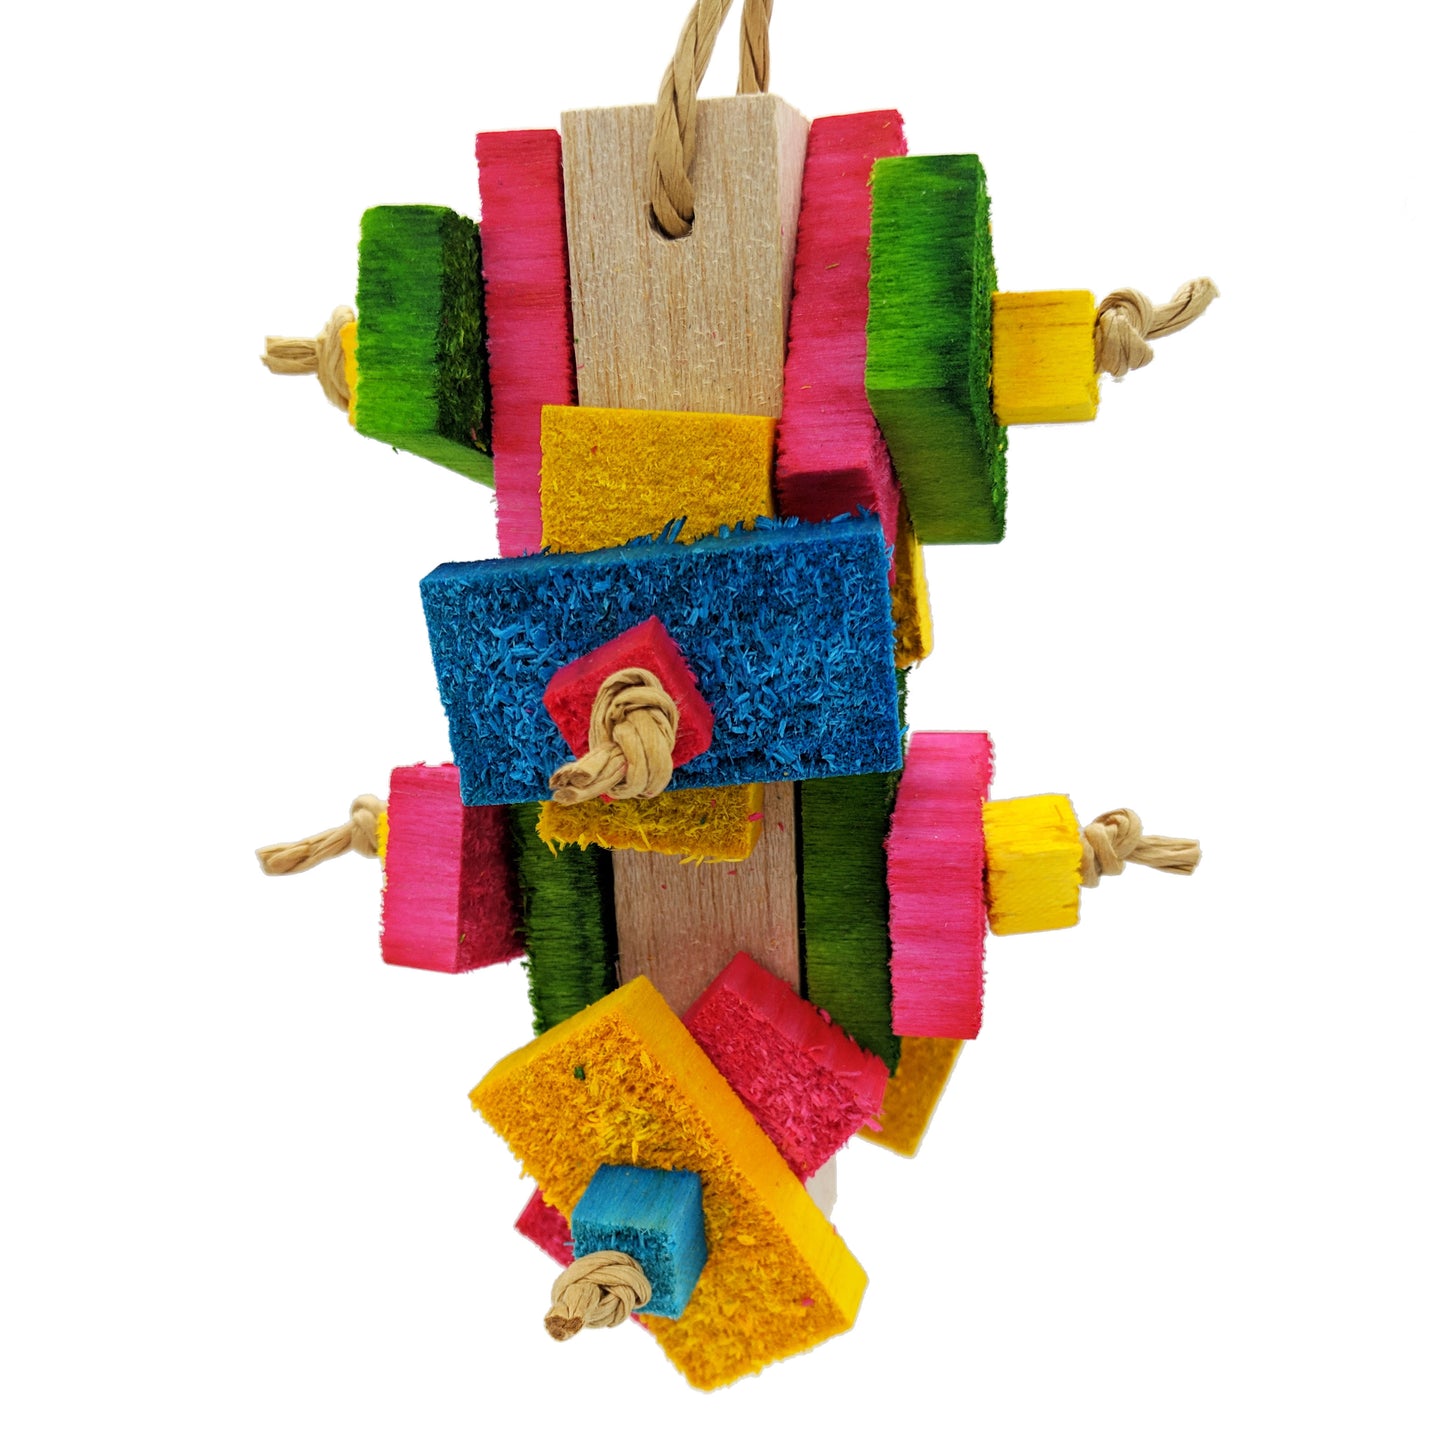 A balsa parrot toy. On a 1 inch by 6 inch base, has 16 half inch balsa slats and 8 half inch balsa cubes attached, 2 sets per side. strung with paper rope. 